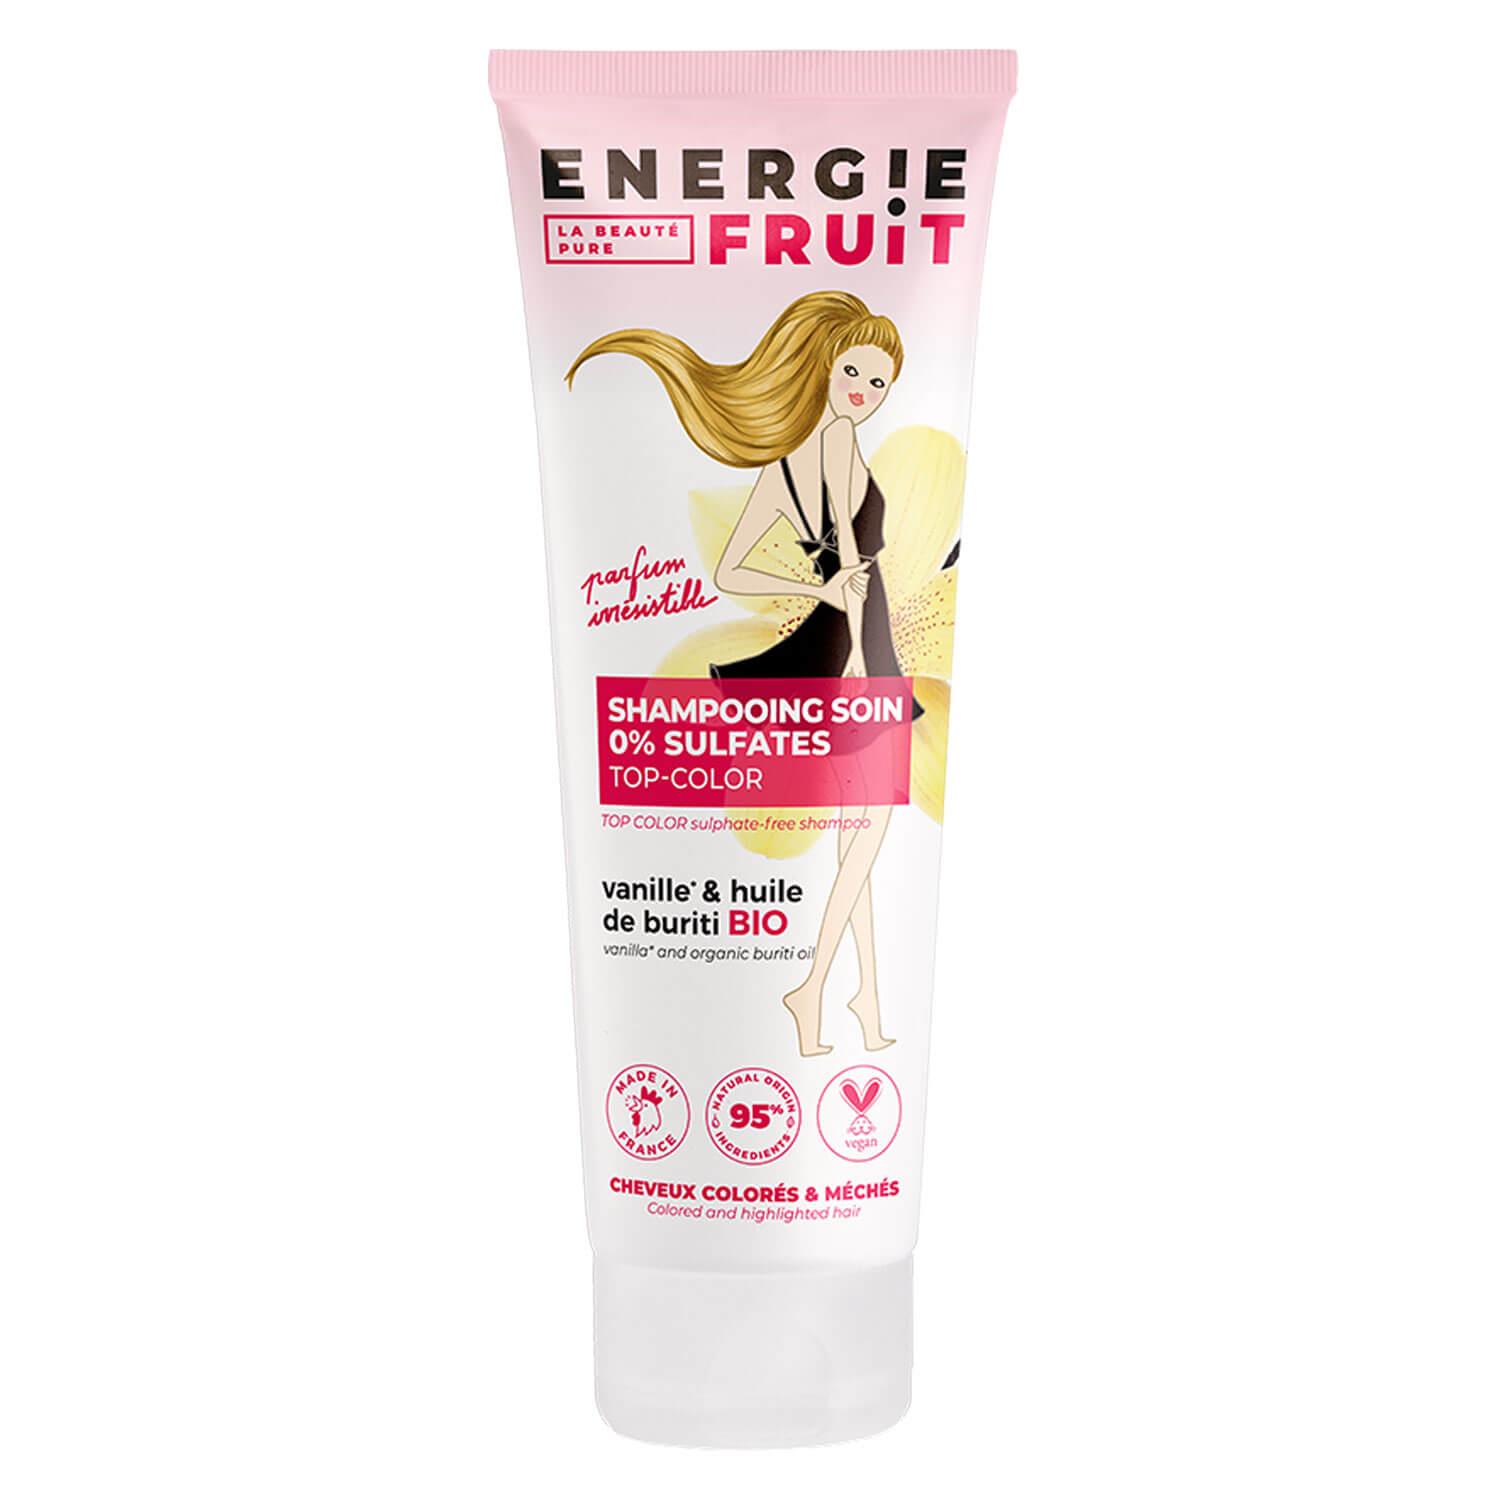 ENERGIE FRUIT - Top-Color Sulphate-Free Shampoo